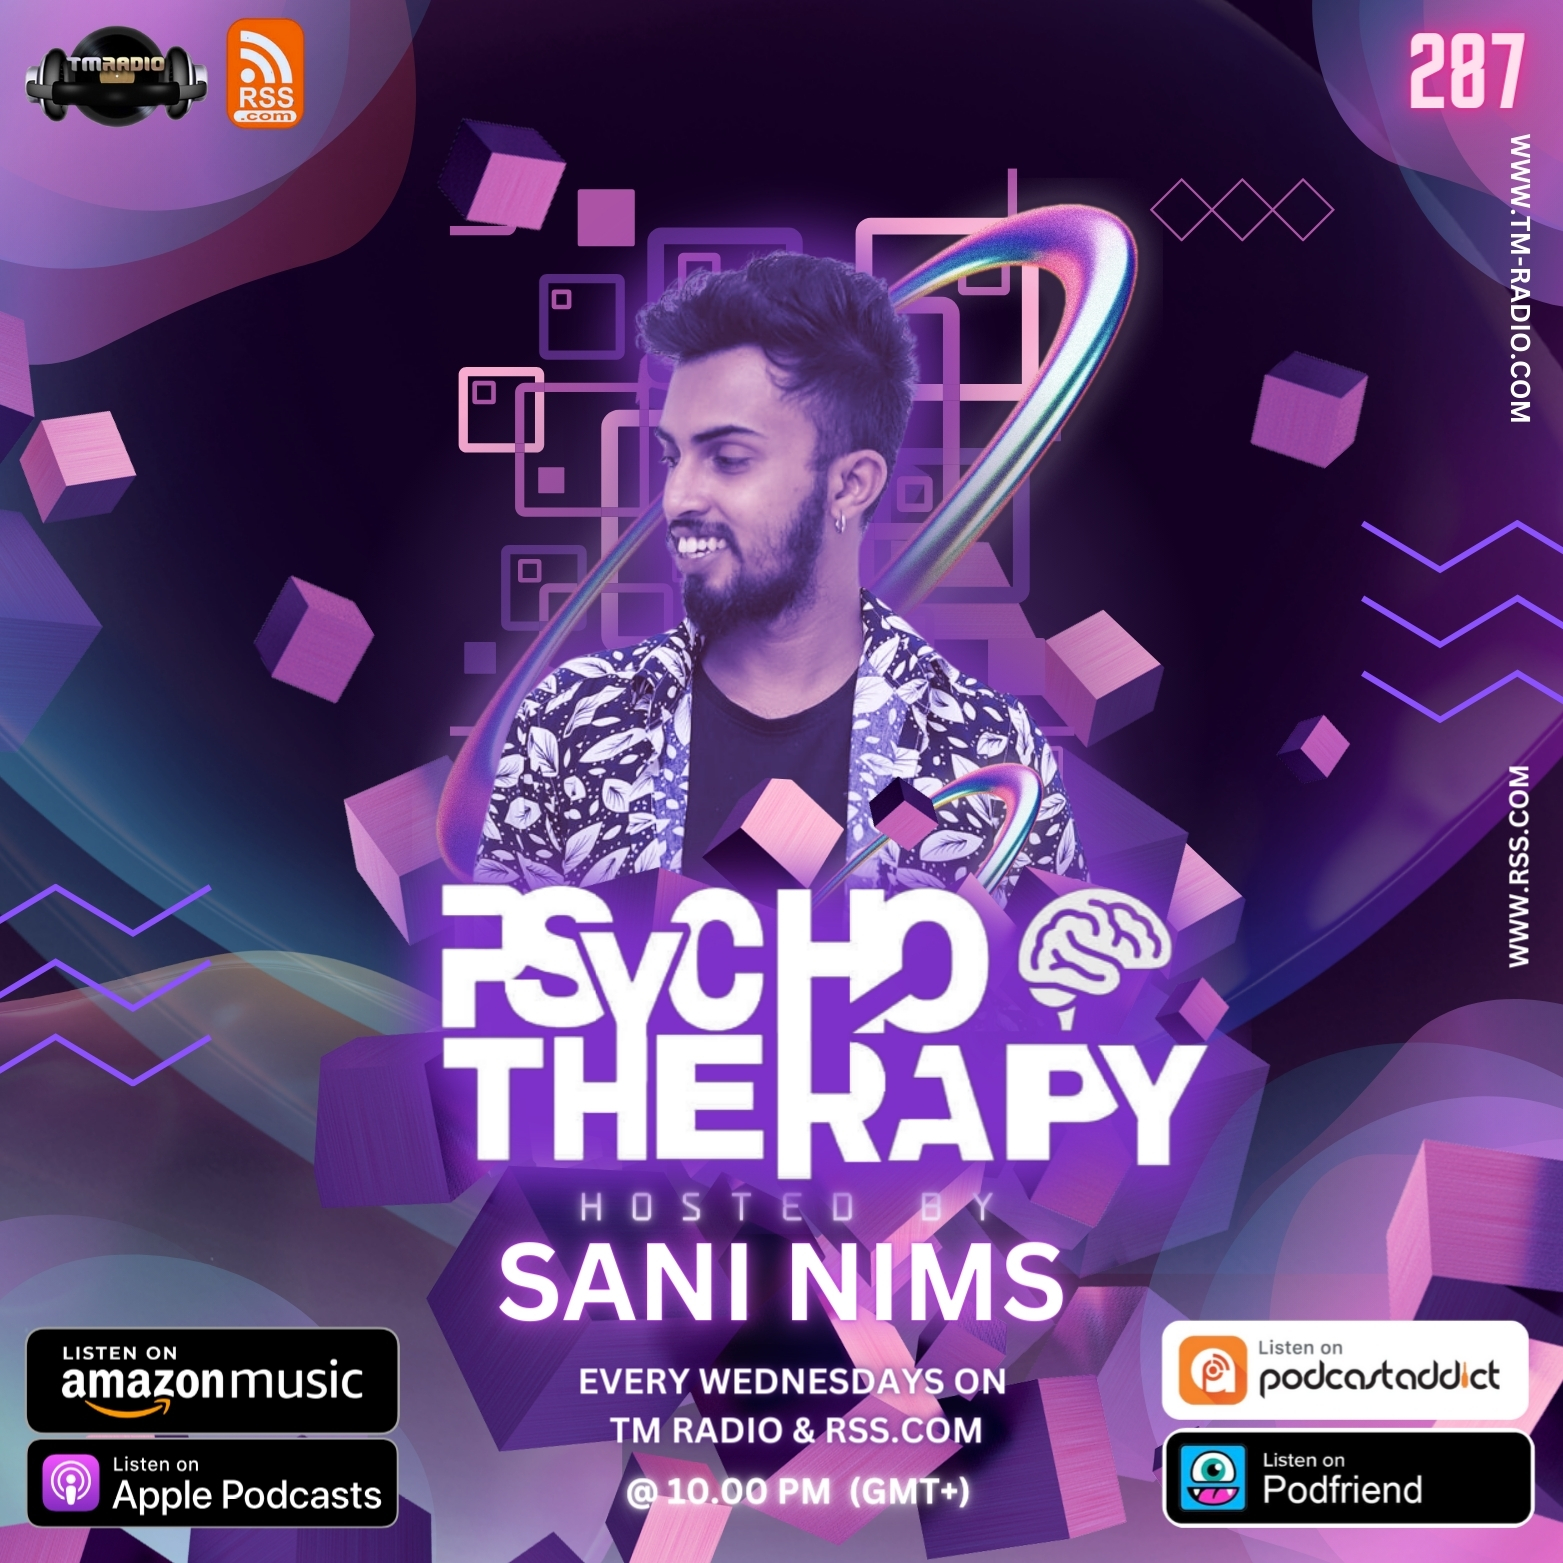 PSYCHO THERAPY EP 287 BY SANI NIMS ON TM RADIO (from April 17th)